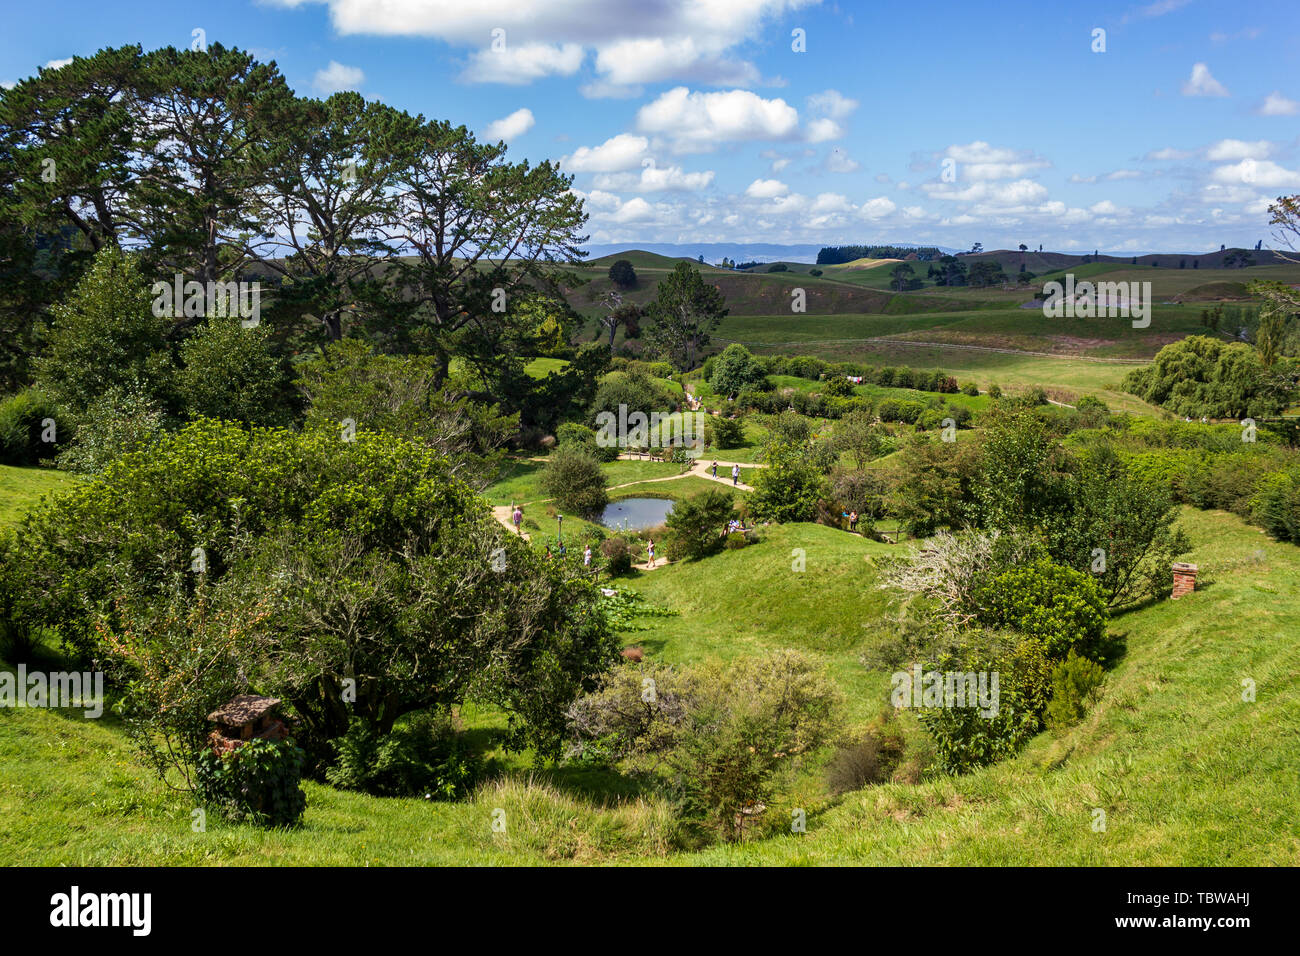 Hobbiton, Movie Set of the Lord of the Rings Movies, Auenland, New Zealand  Stock Photo - Alamy